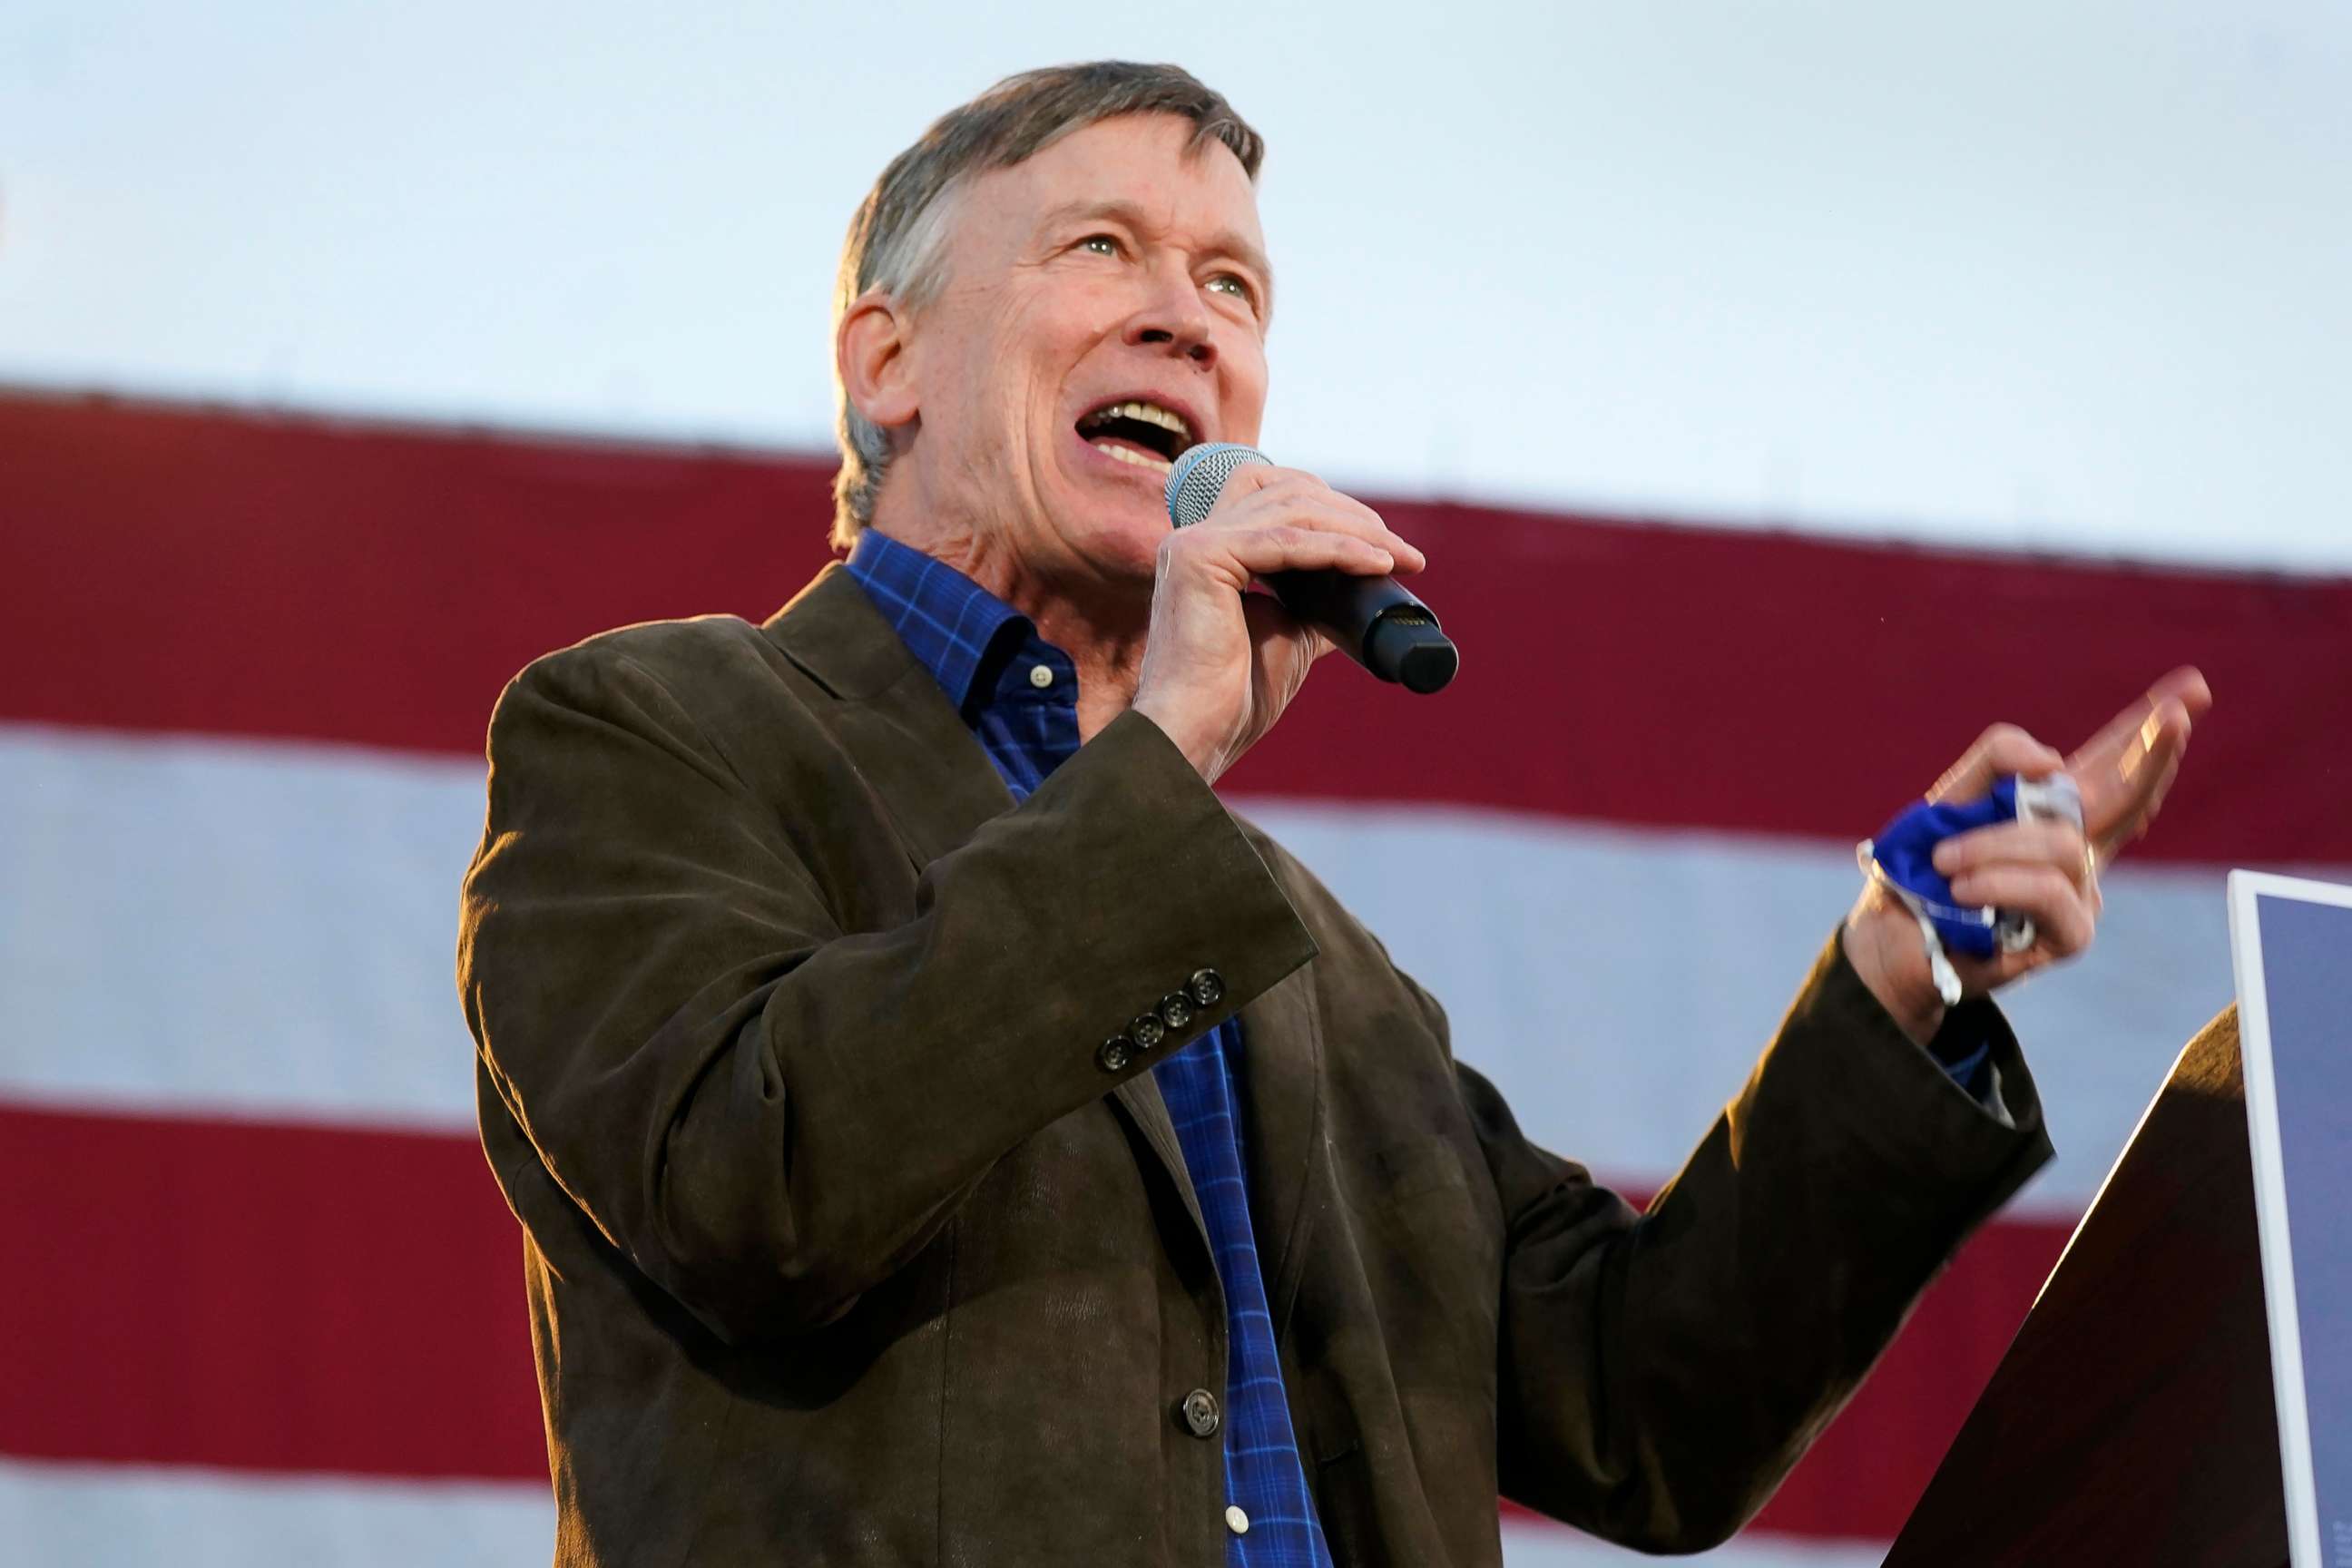 PHOTO: John Hickenlooper, Democratic candidate for the U.S. Senate seat in Colorado, speaks during a car rally in Denver, Oct. 8, 2020.